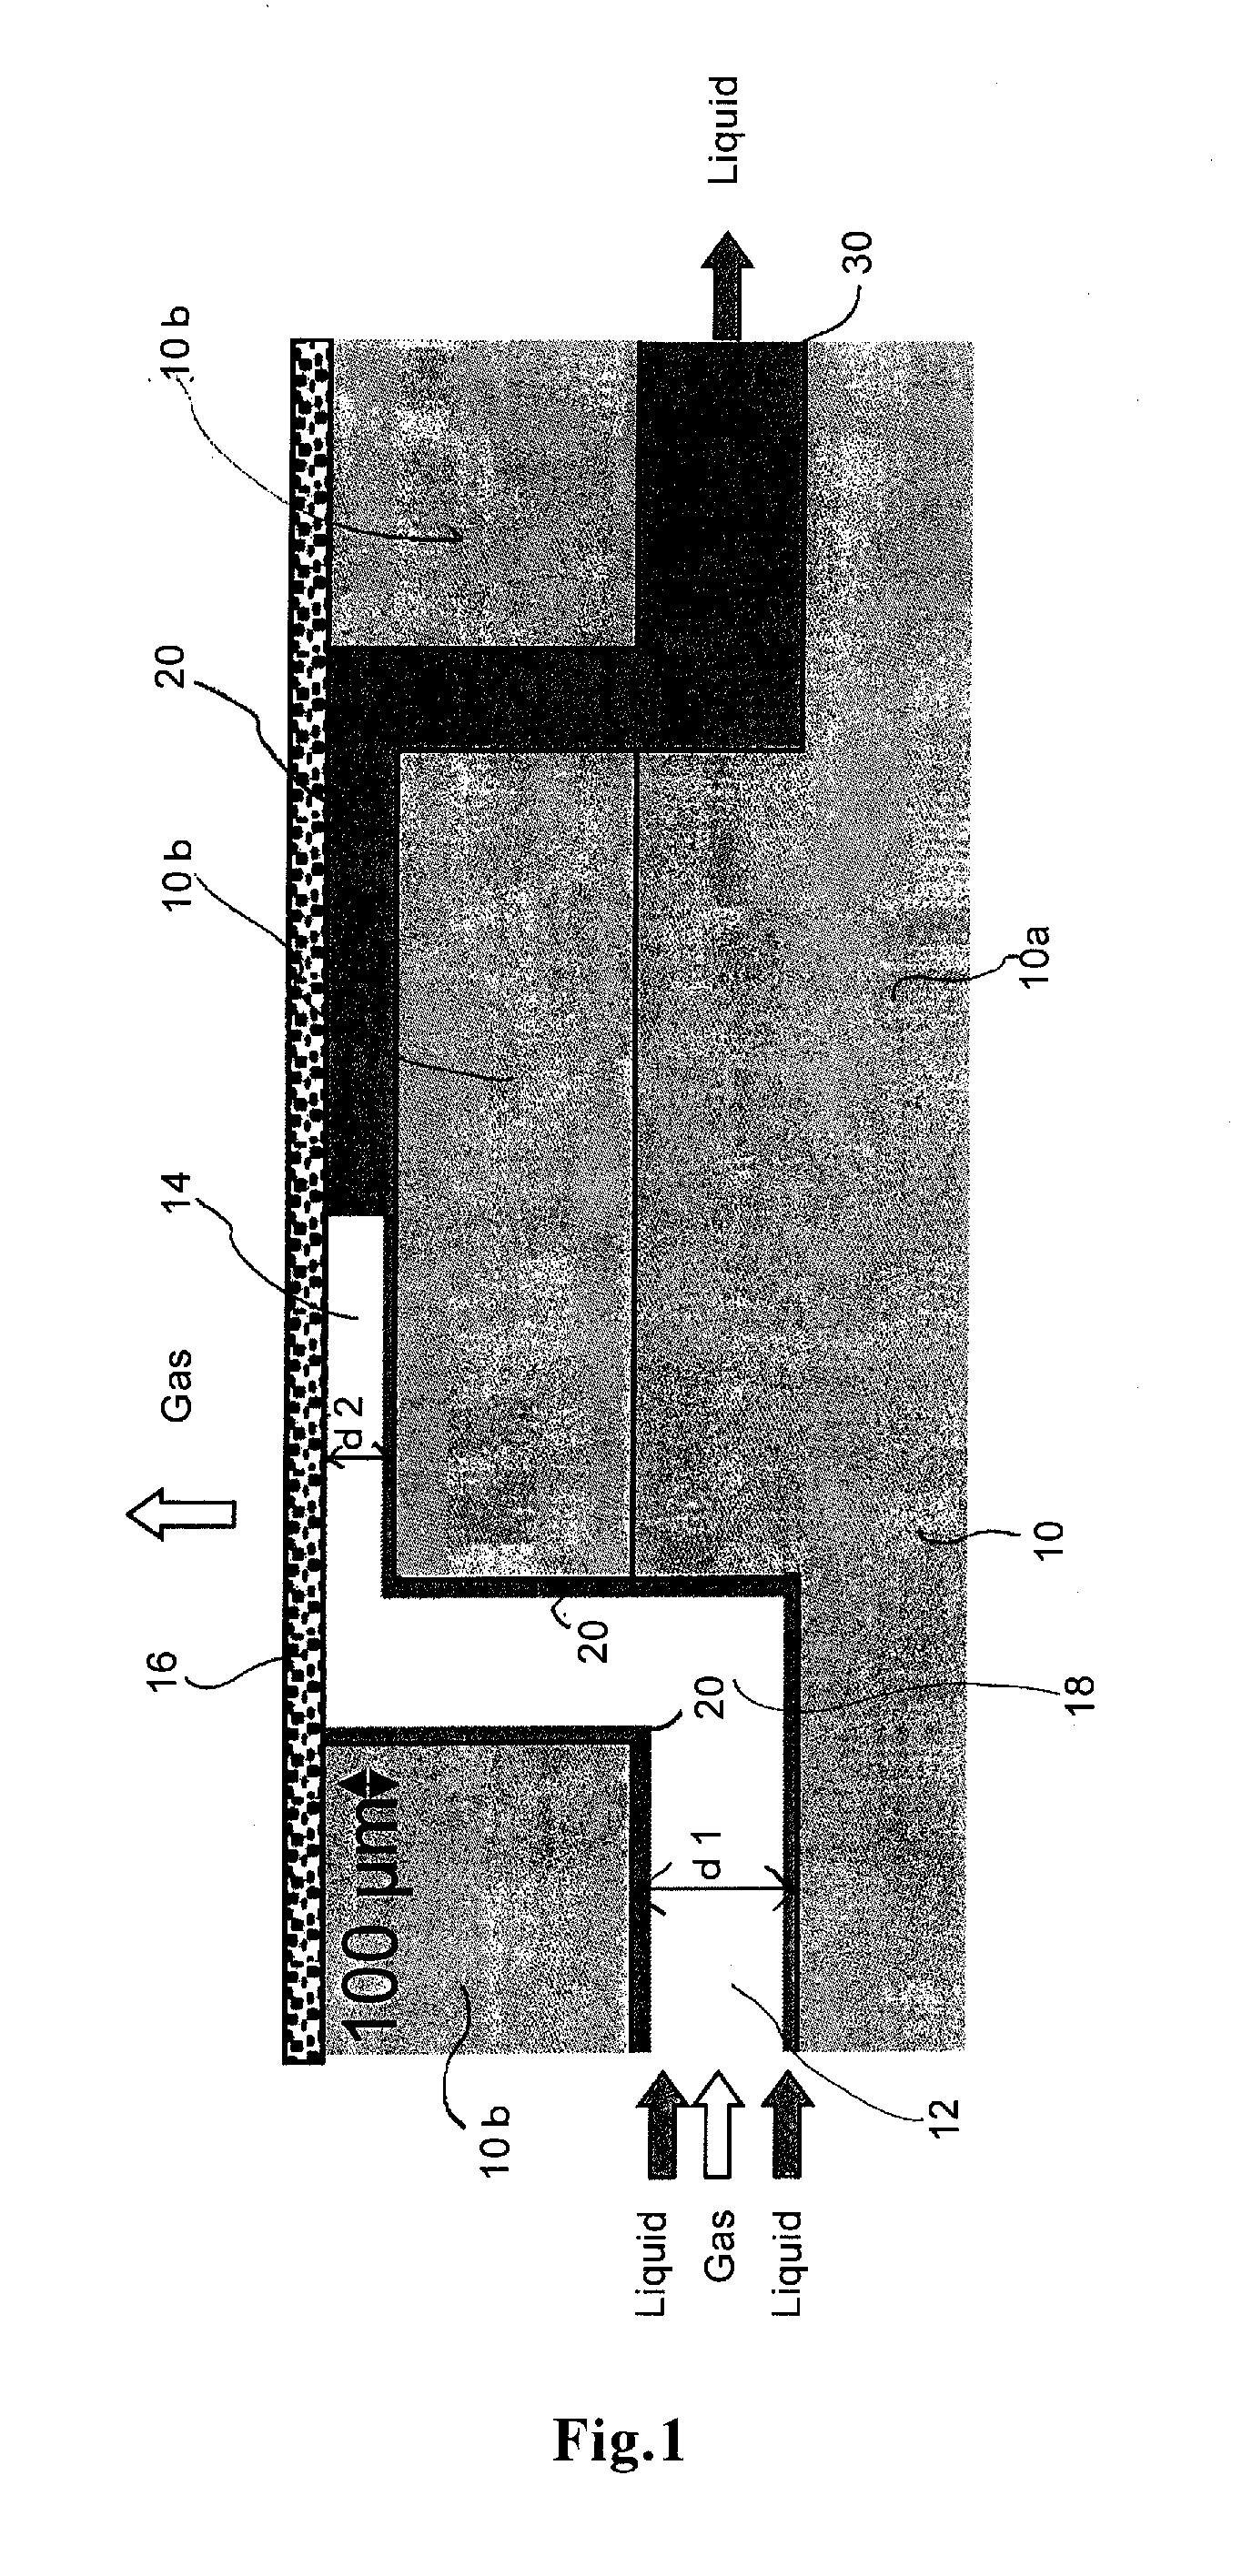 Microchannel chip and method for gas-liquid phase separation using same